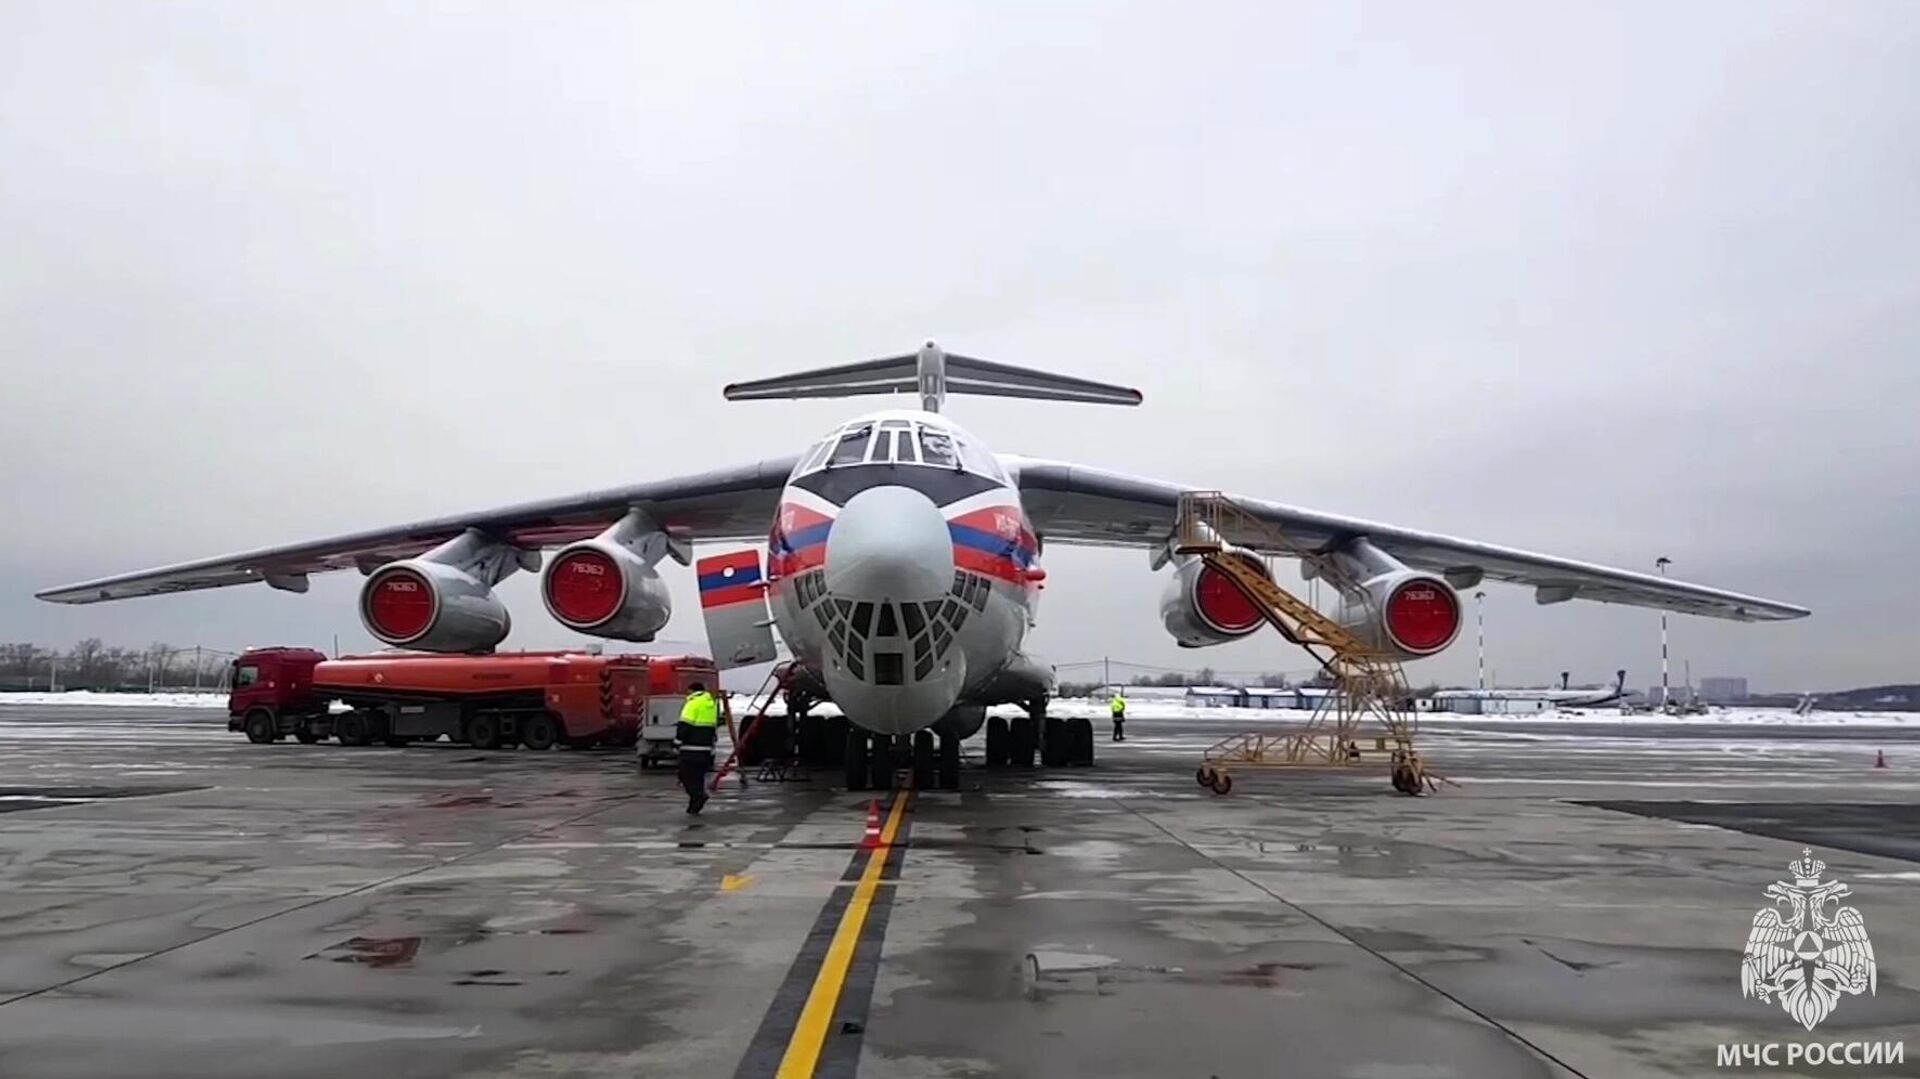 Russian Emergencies Ministry's Il-76 aircraft carrying rescue teams to help eliminate the consequences of the earthquakes in Syria and Turkey. - Sputnik India, 1920, 08.02.2023